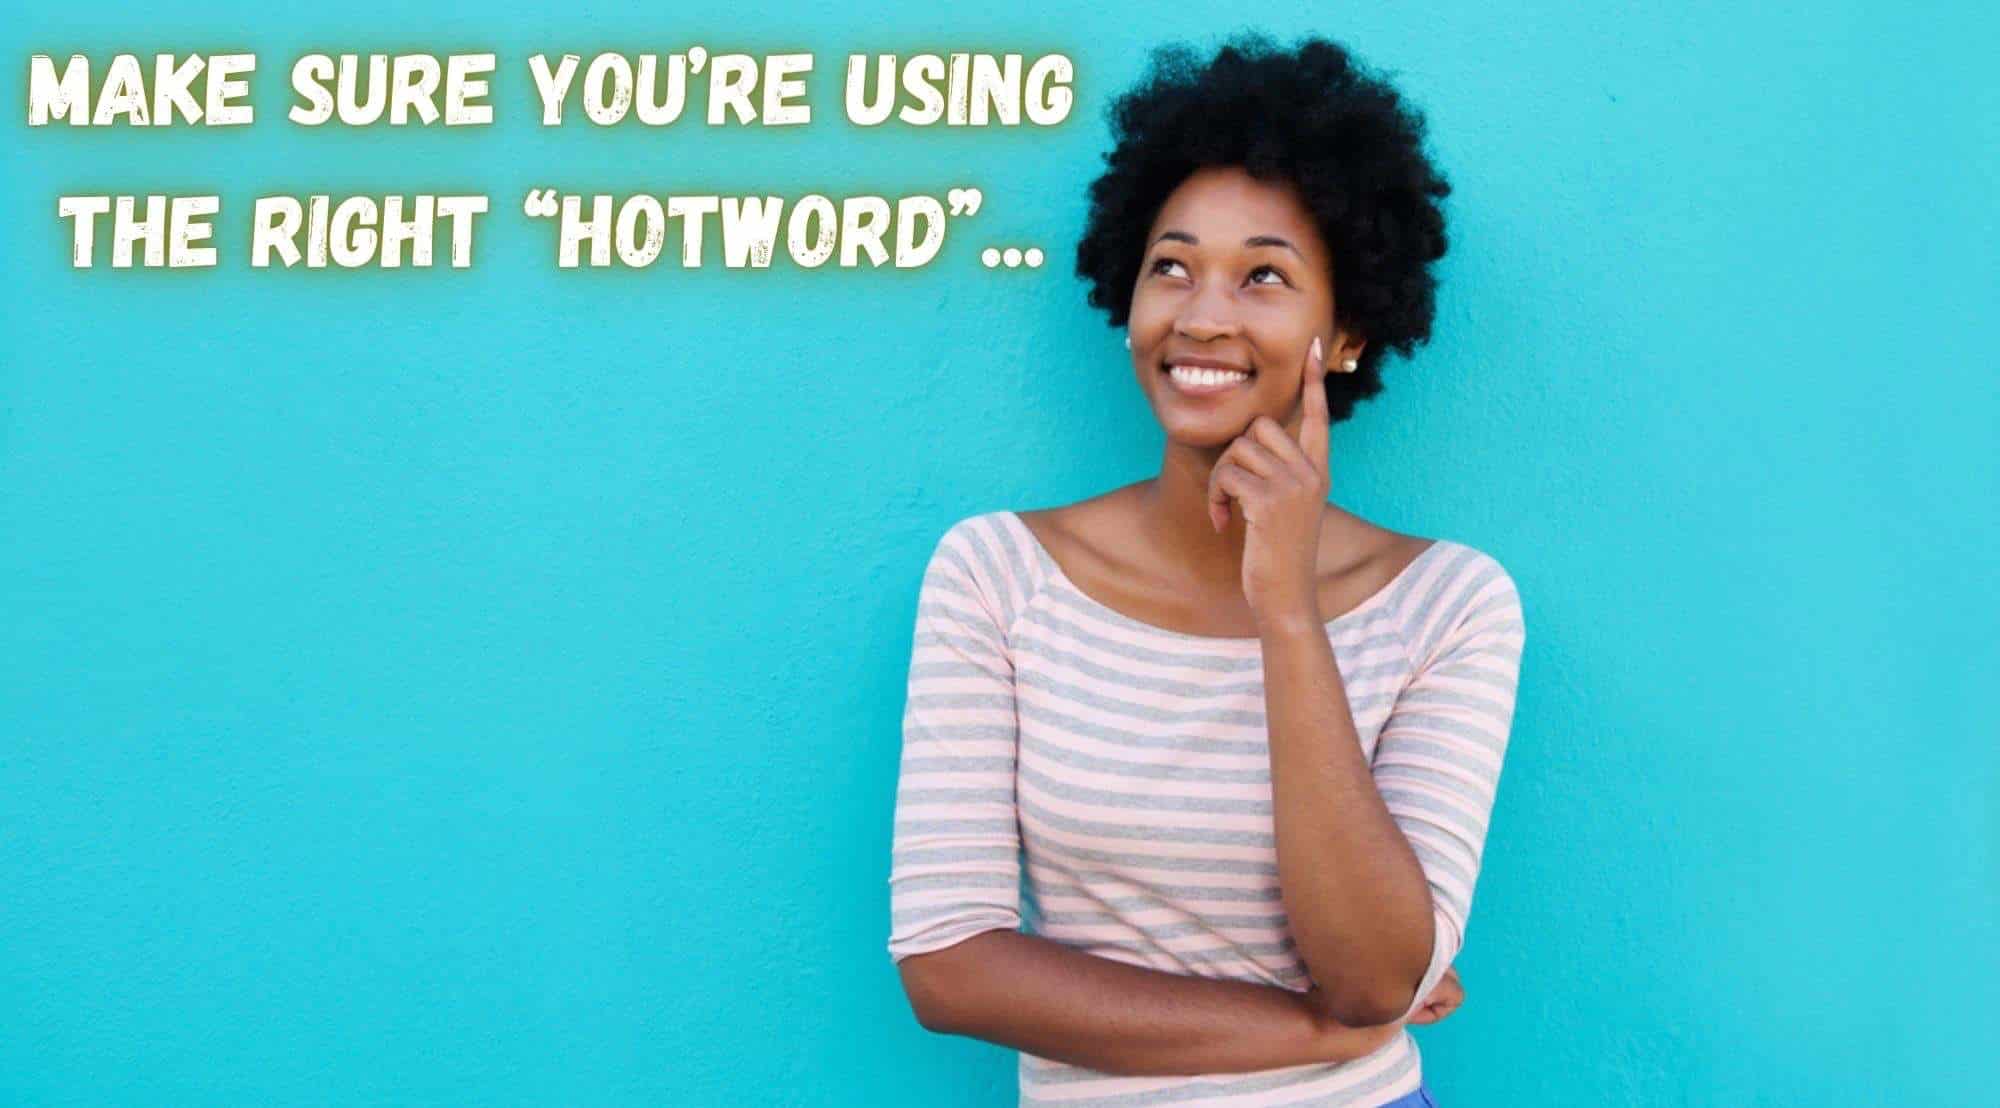 Make sure you’re using the right Hotword